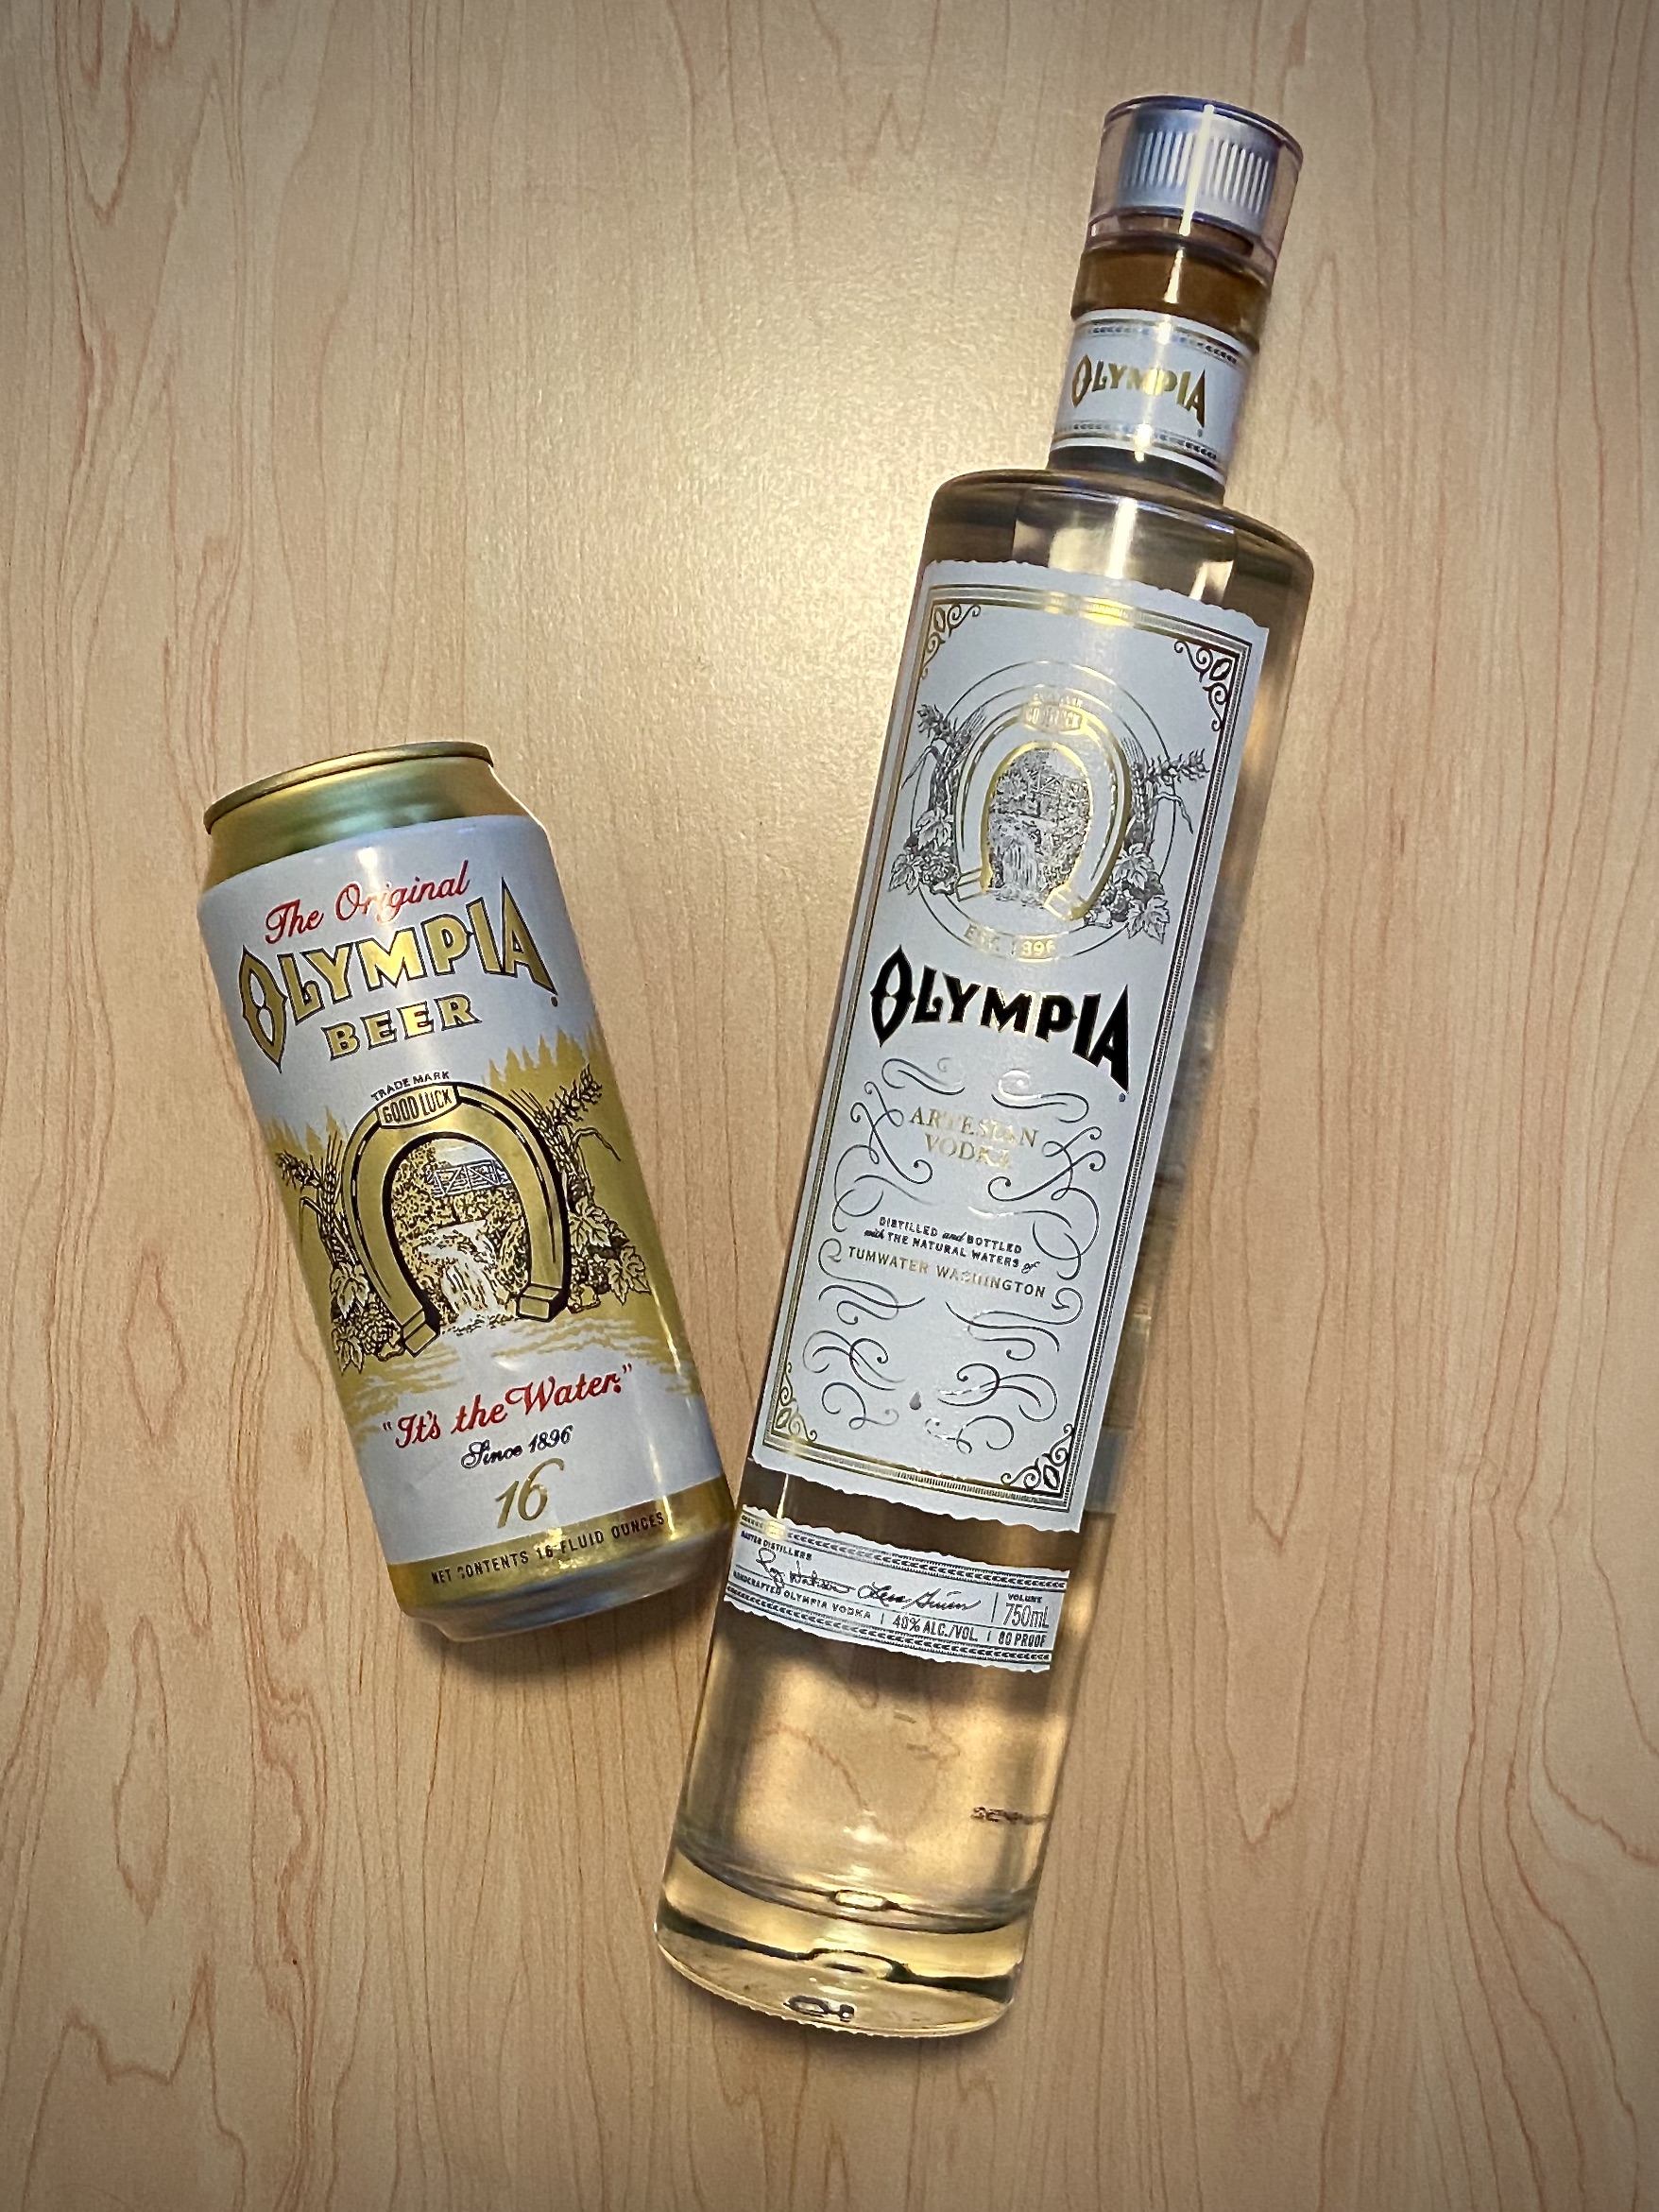 A Tallboy of Olympia Beer and the new Olympia Artesian Vodka.